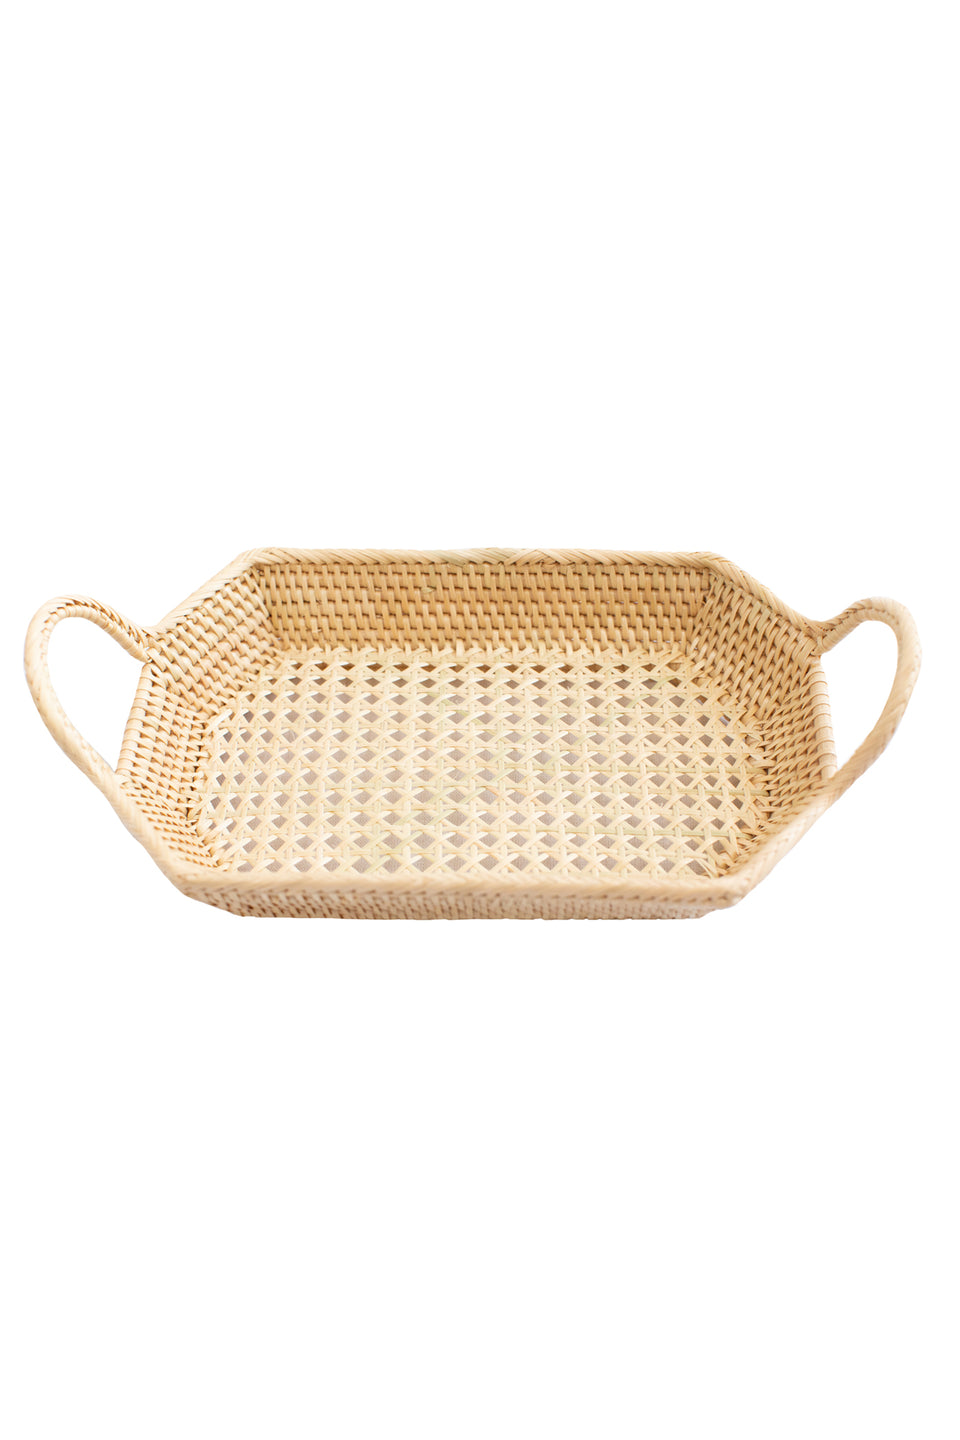 Small Woven Tray w/Handles